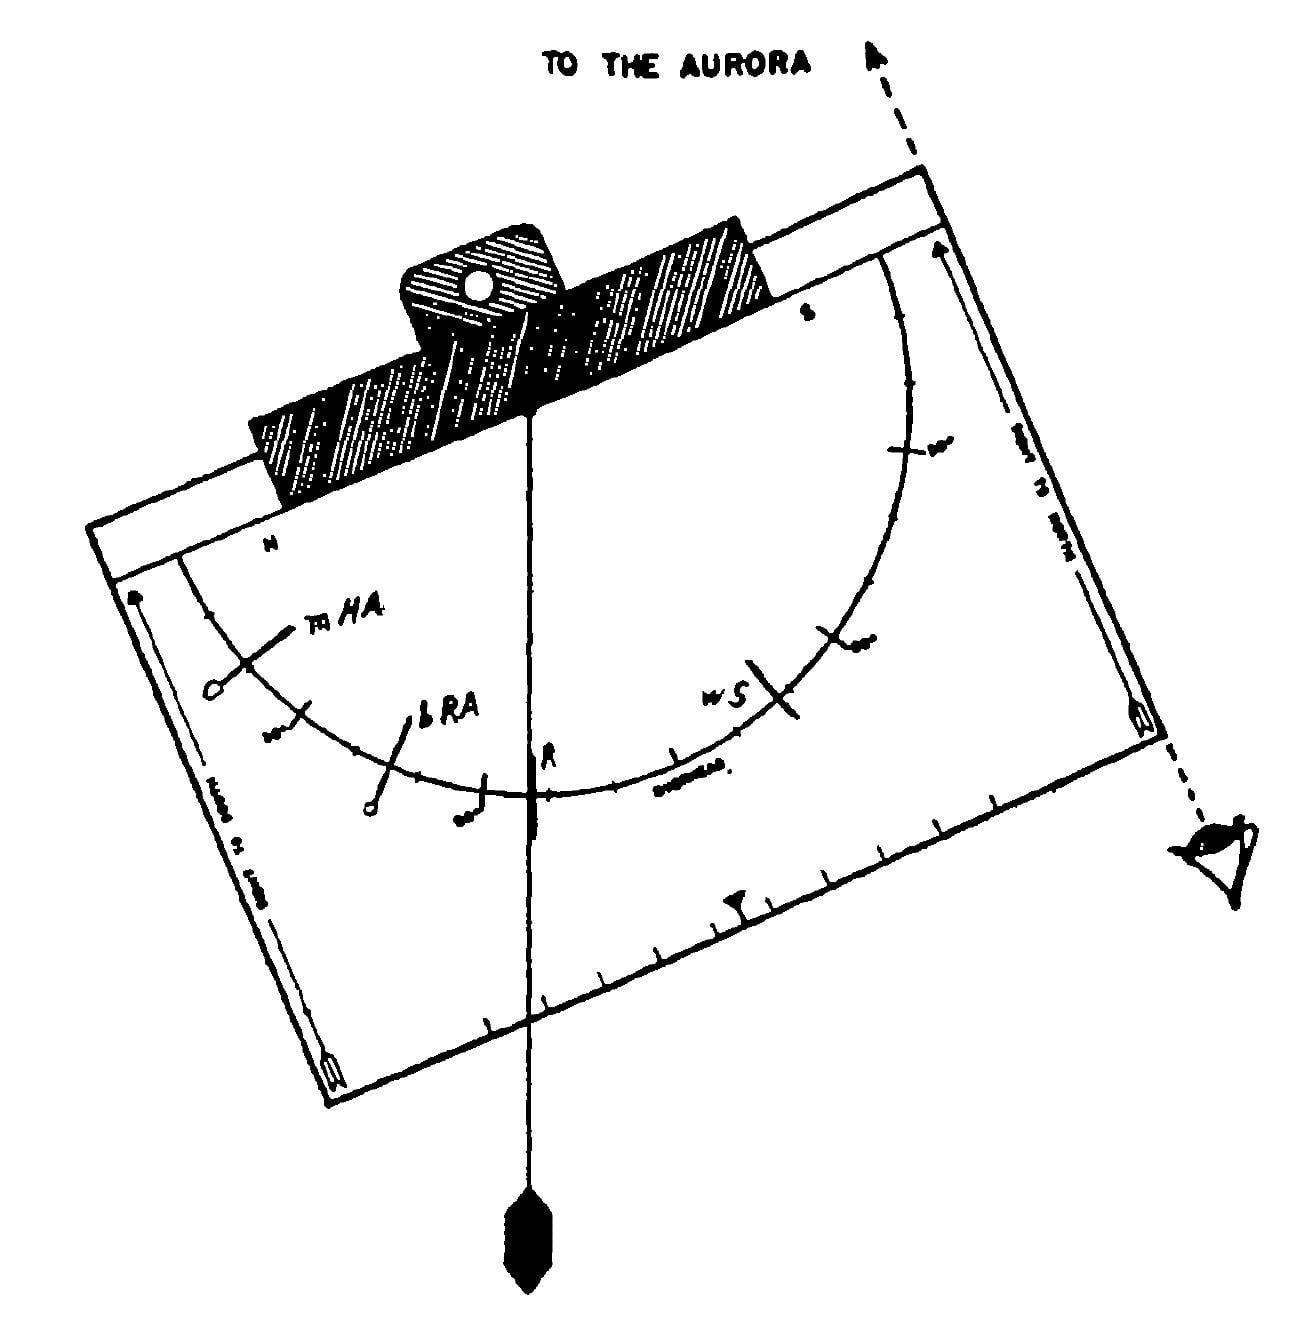 back of the form acted as an azimuth measuring device